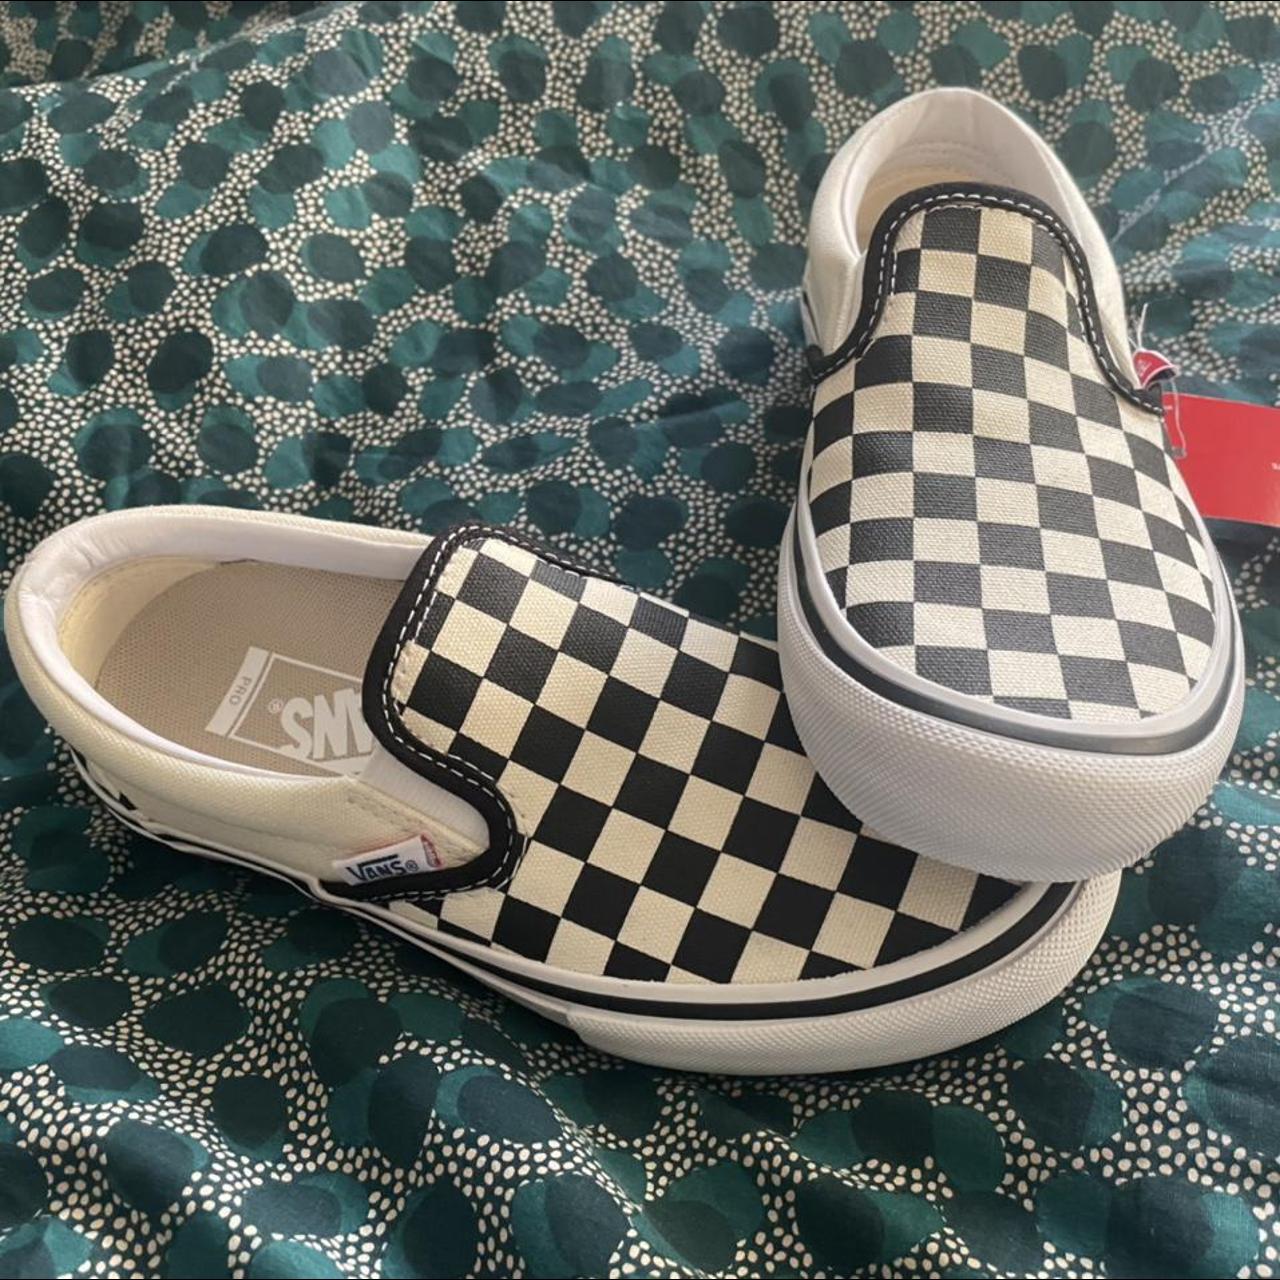 Product Image 1 - ON HOLD - BNWT Vans